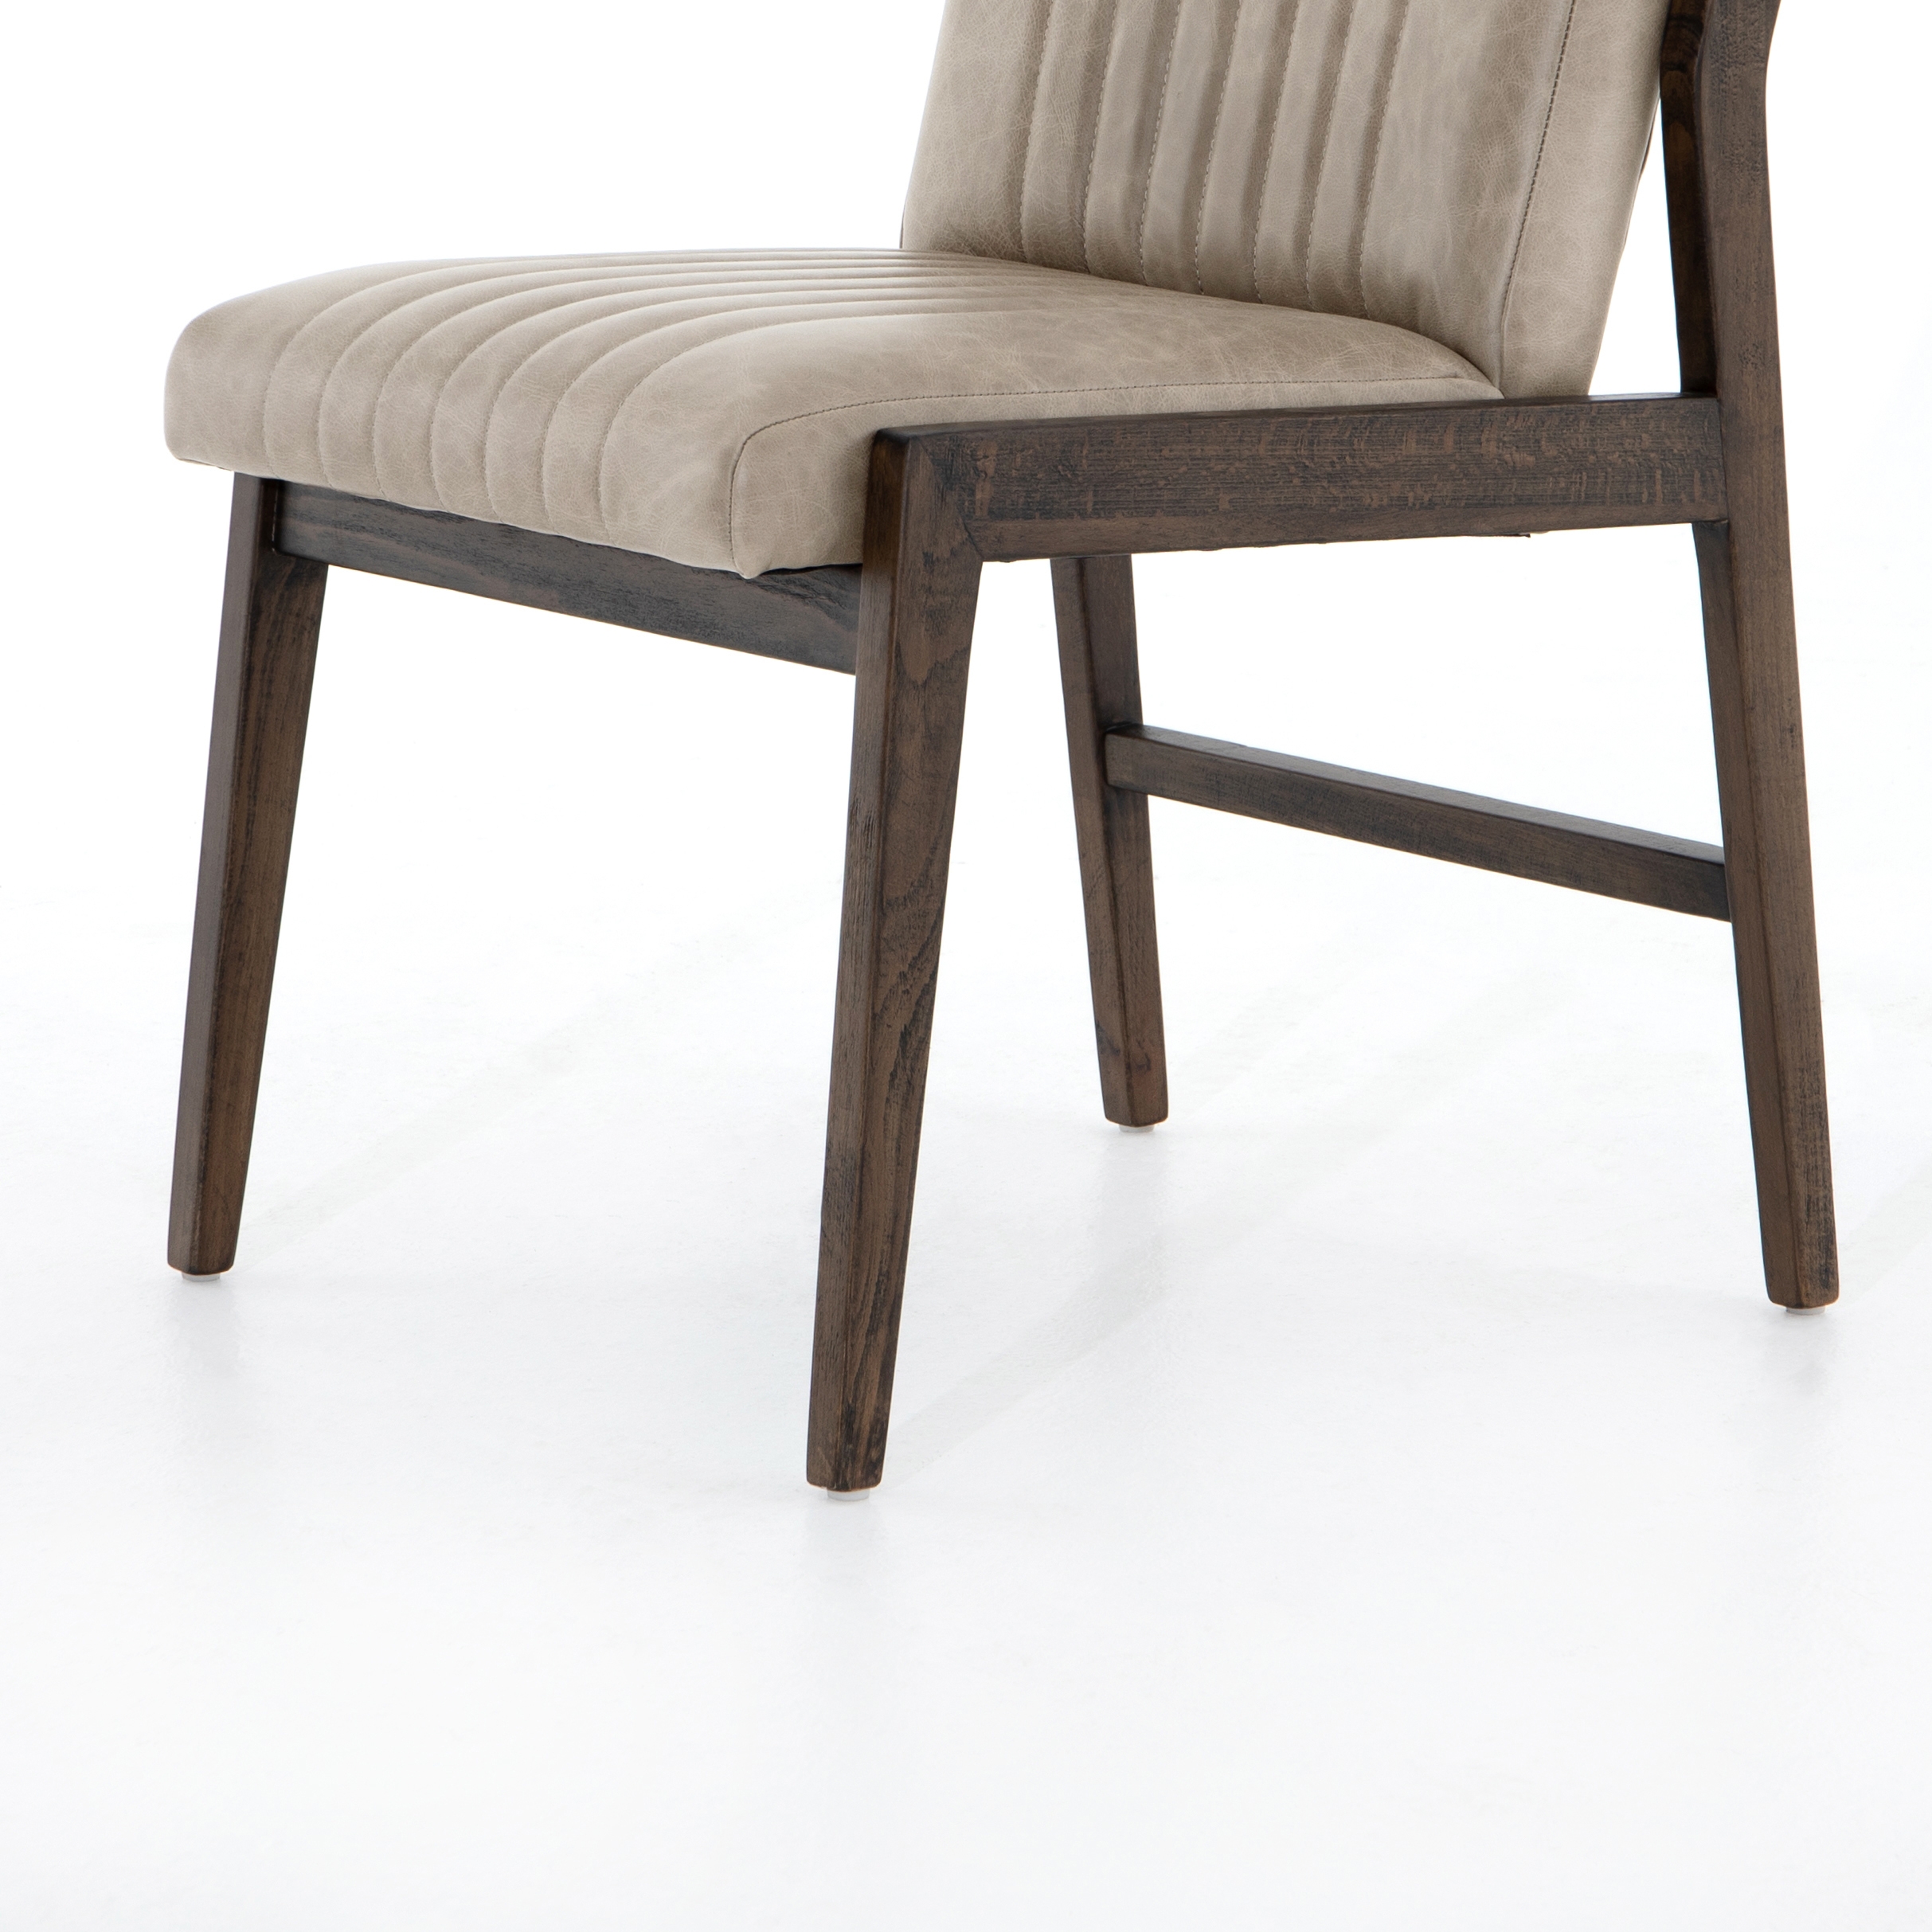 Alice Dining Chair-Sonoma Grey - Image 2